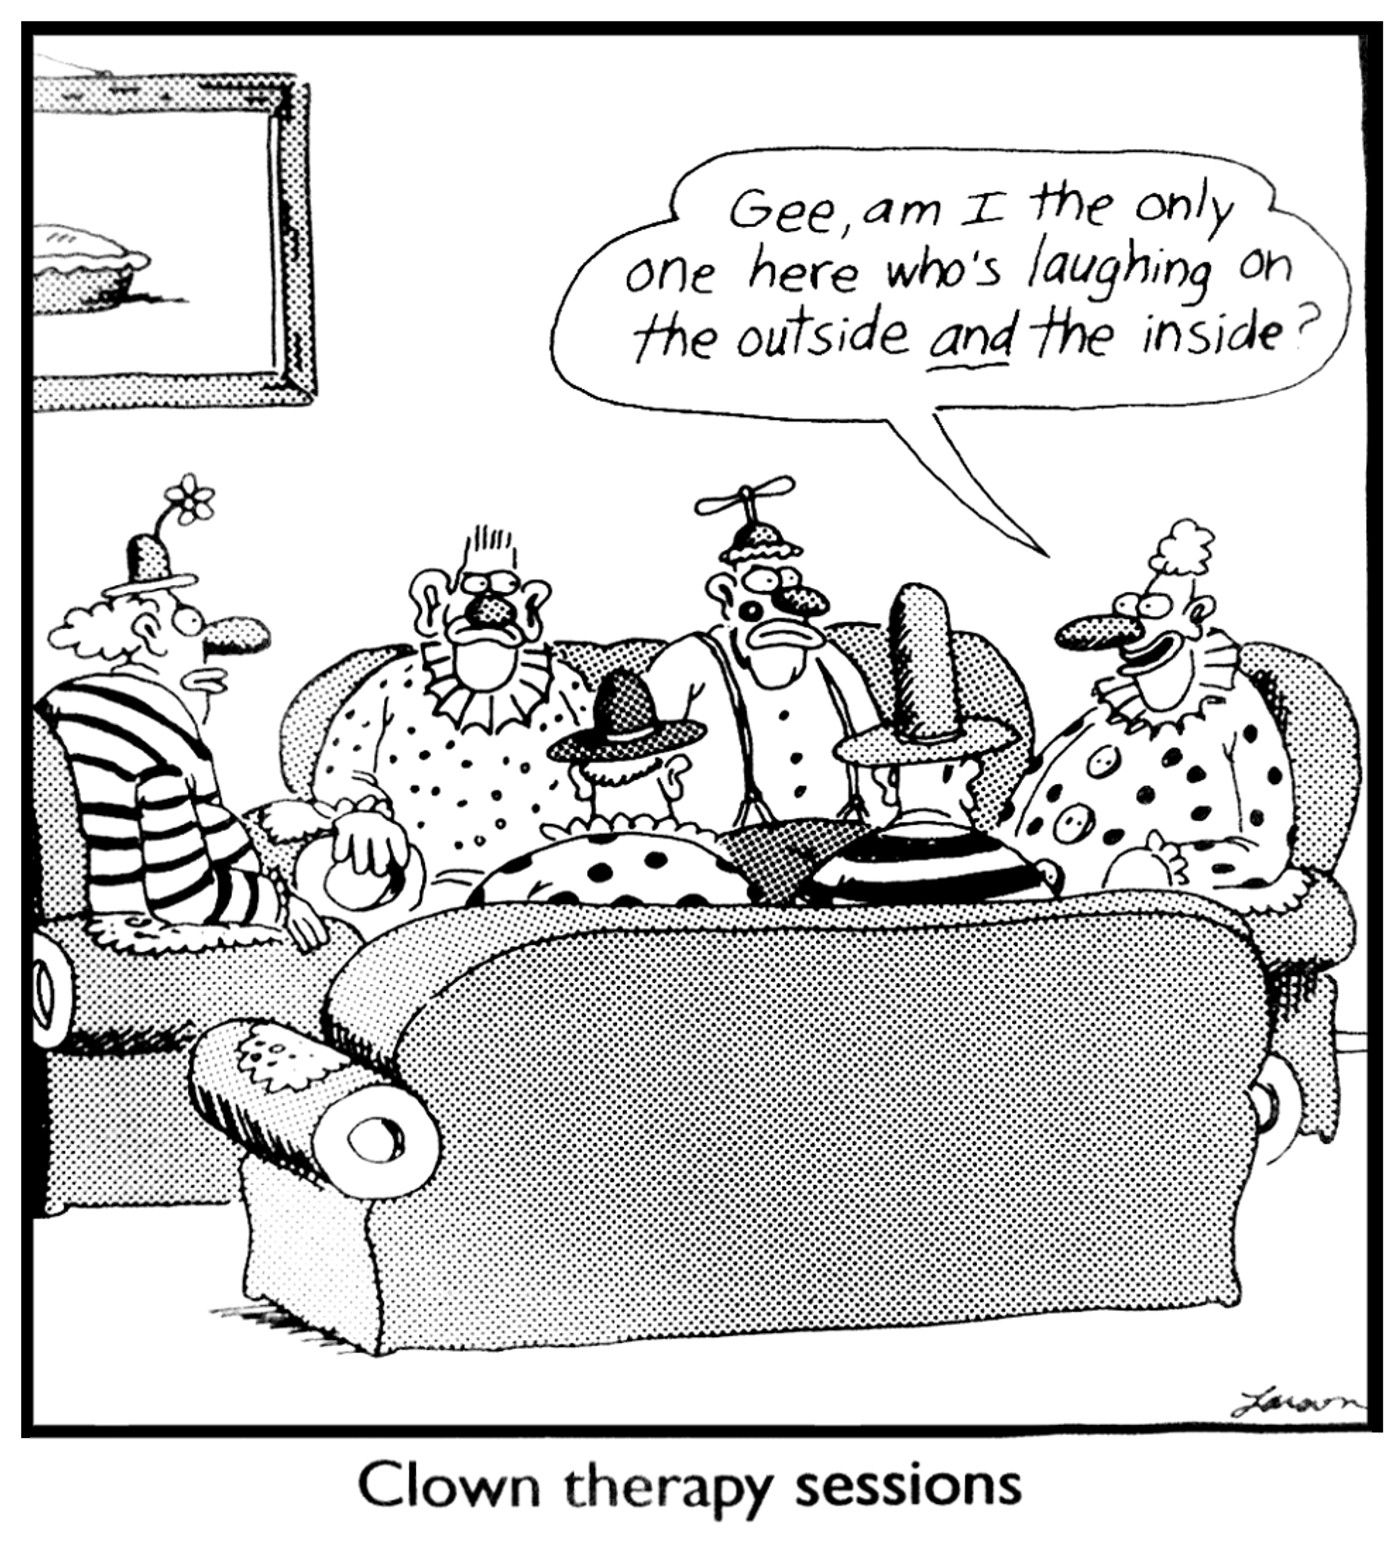 12 Funniest Far Side Comics That Prove It’s Obsessed with Clowns